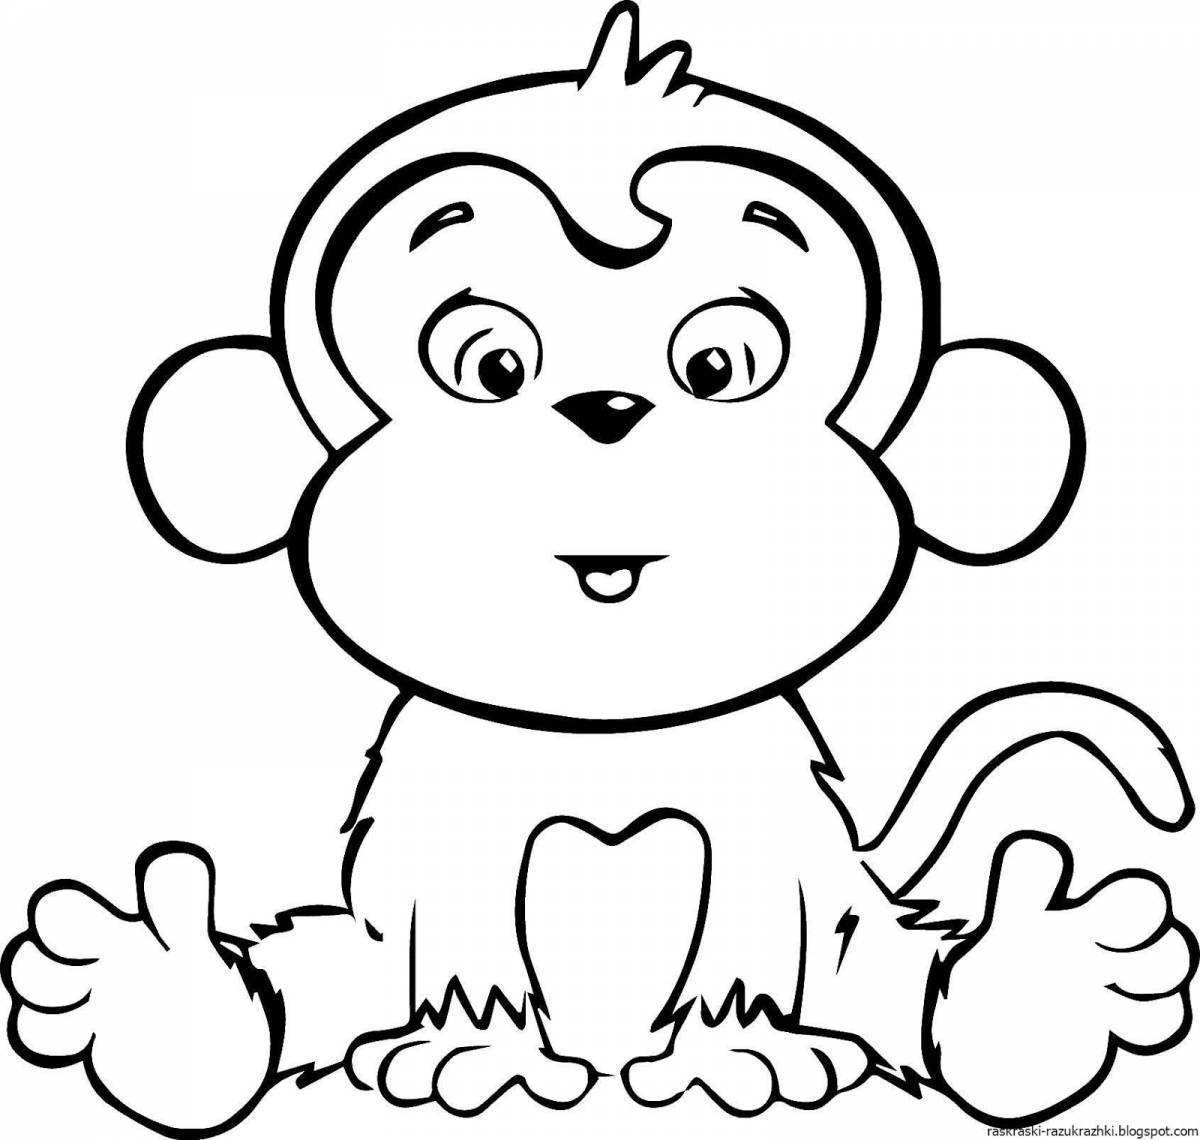 Coloring Animal Explosion Coloring Pages for Kids